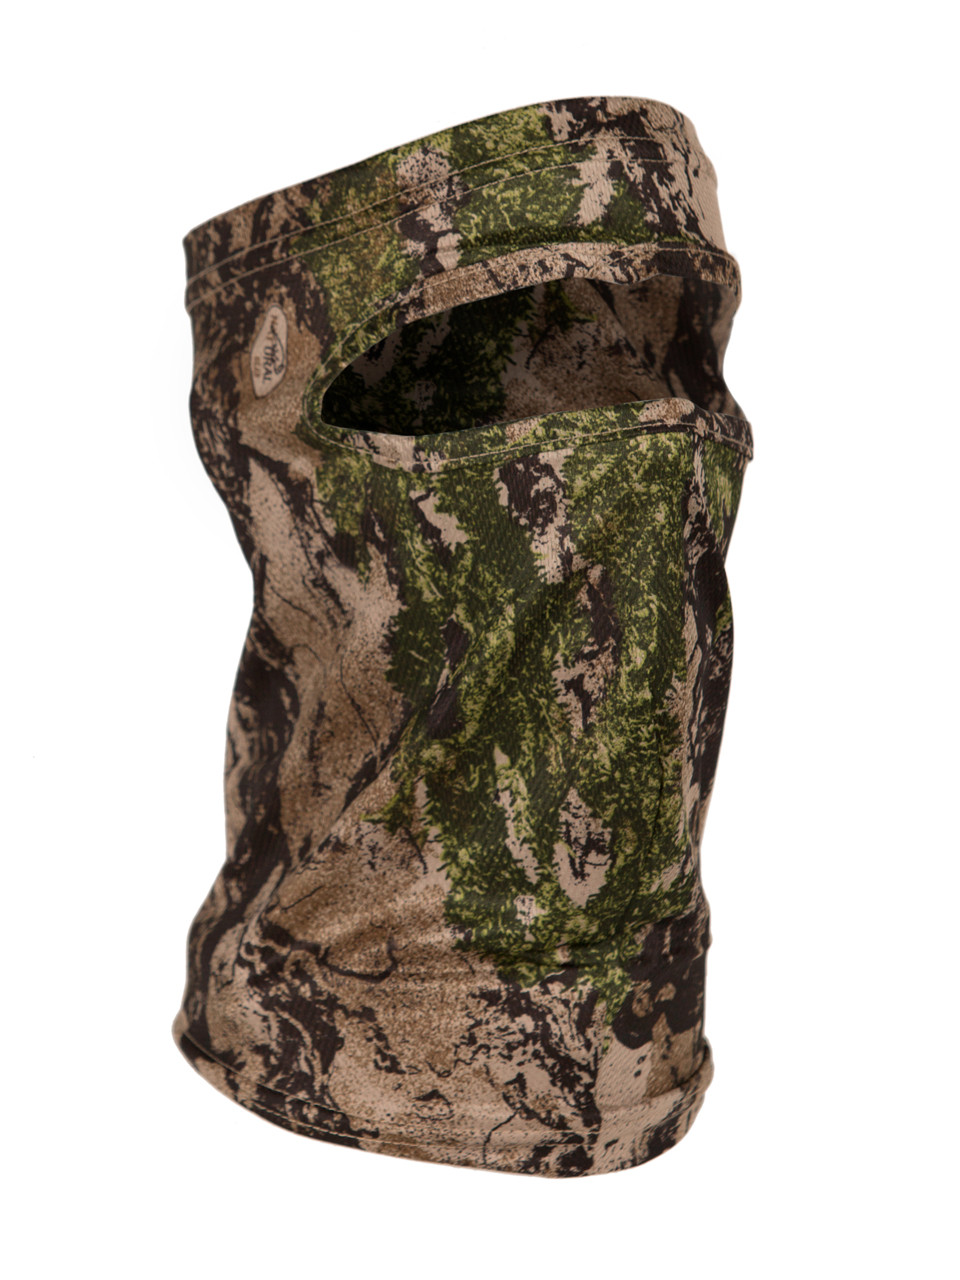 Cool-Tech Turkey Hunting Face Mask | Natural Gear